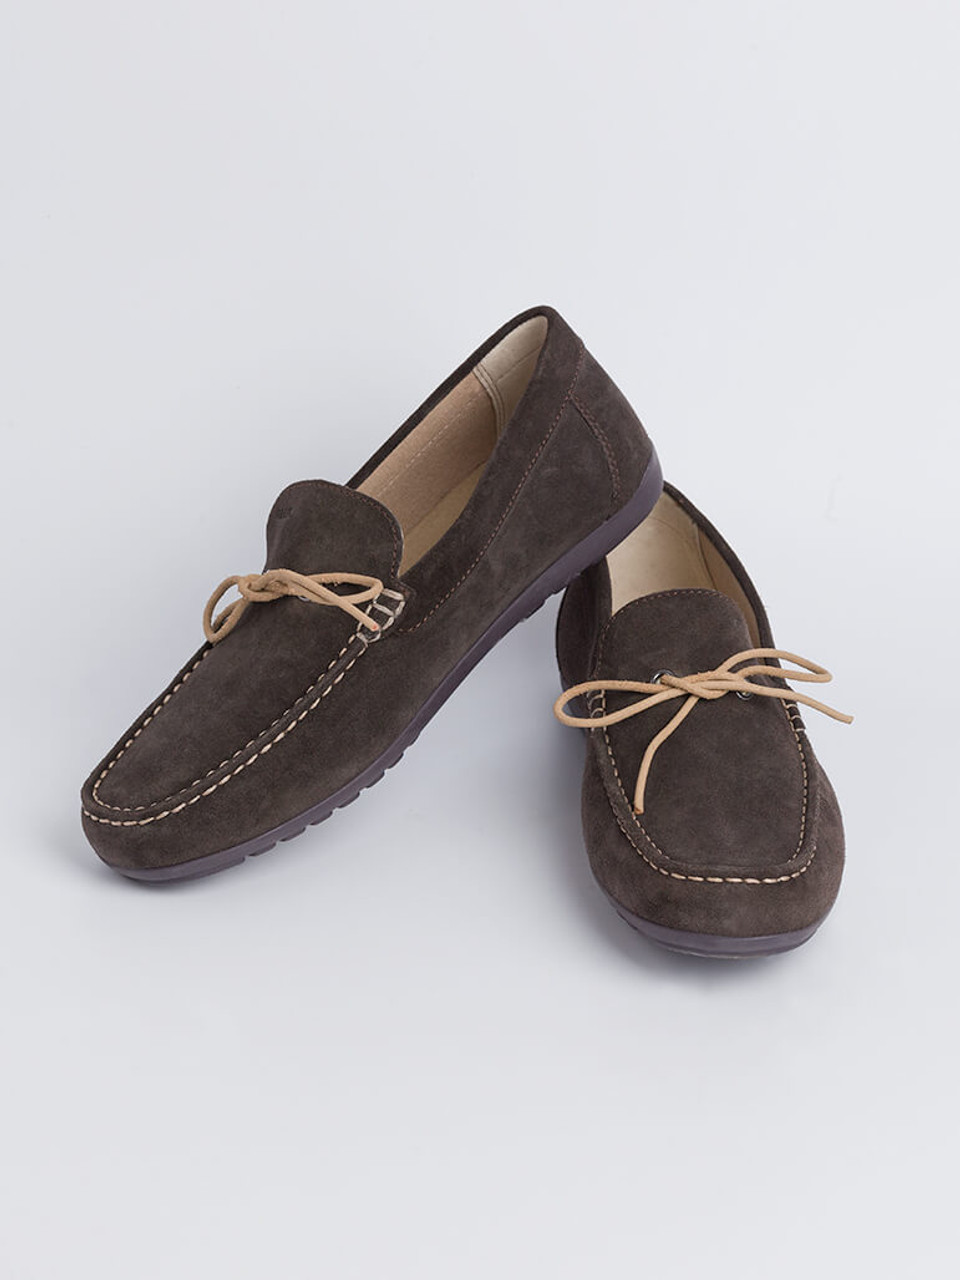 Brown Geox Moccasin | Peter Christian